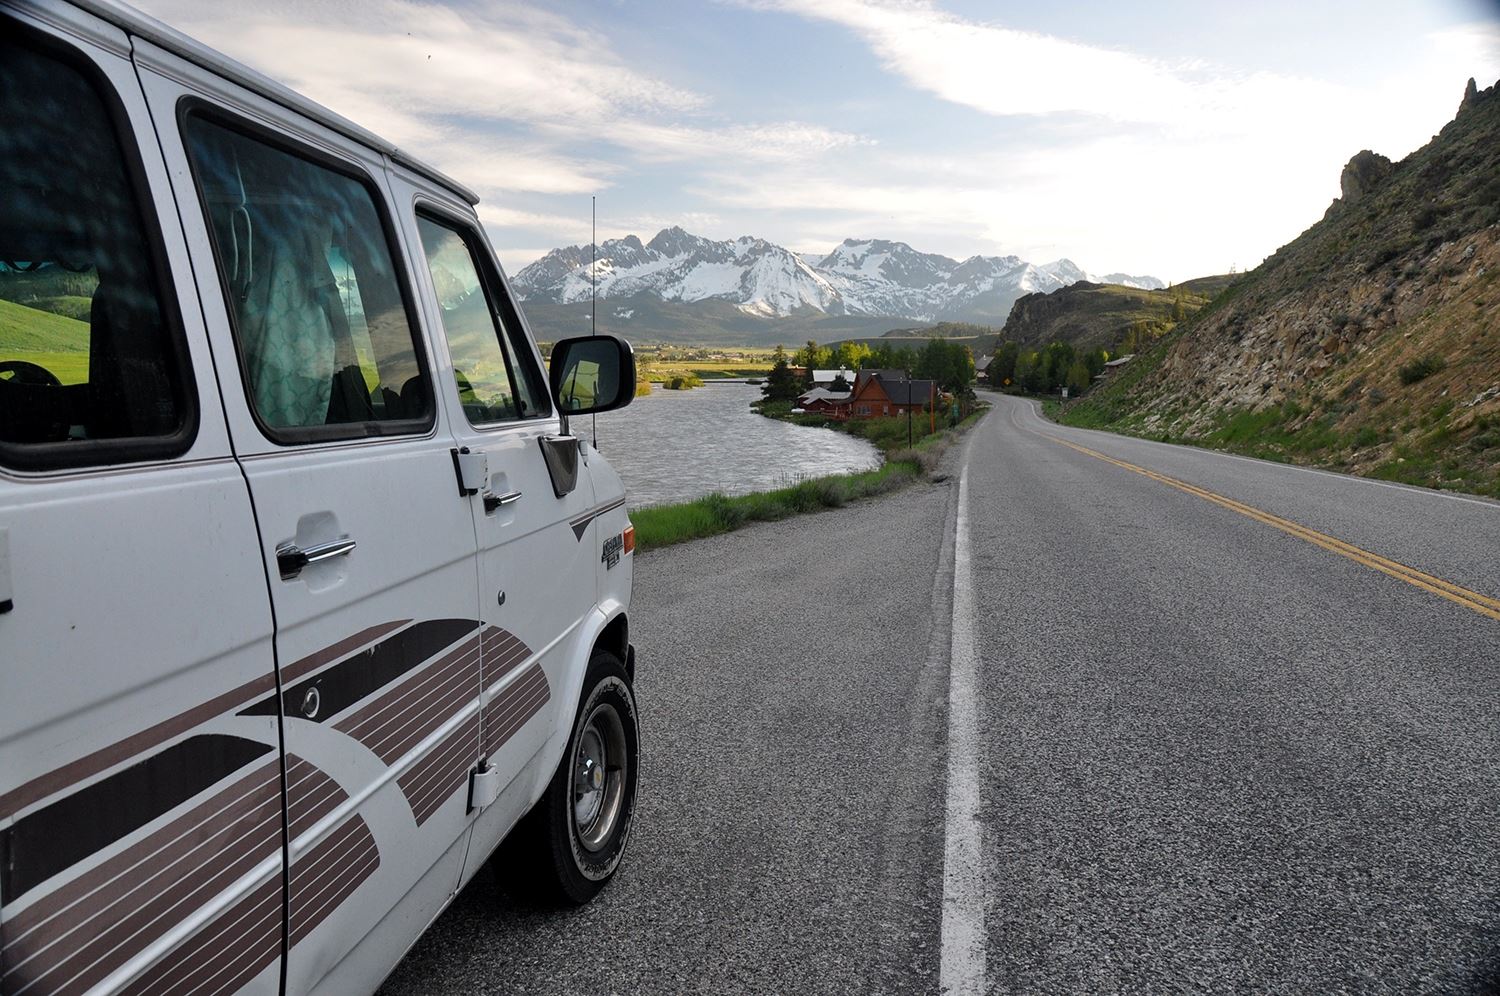 Cheap Road Trip Tips Van on Highway Mountains